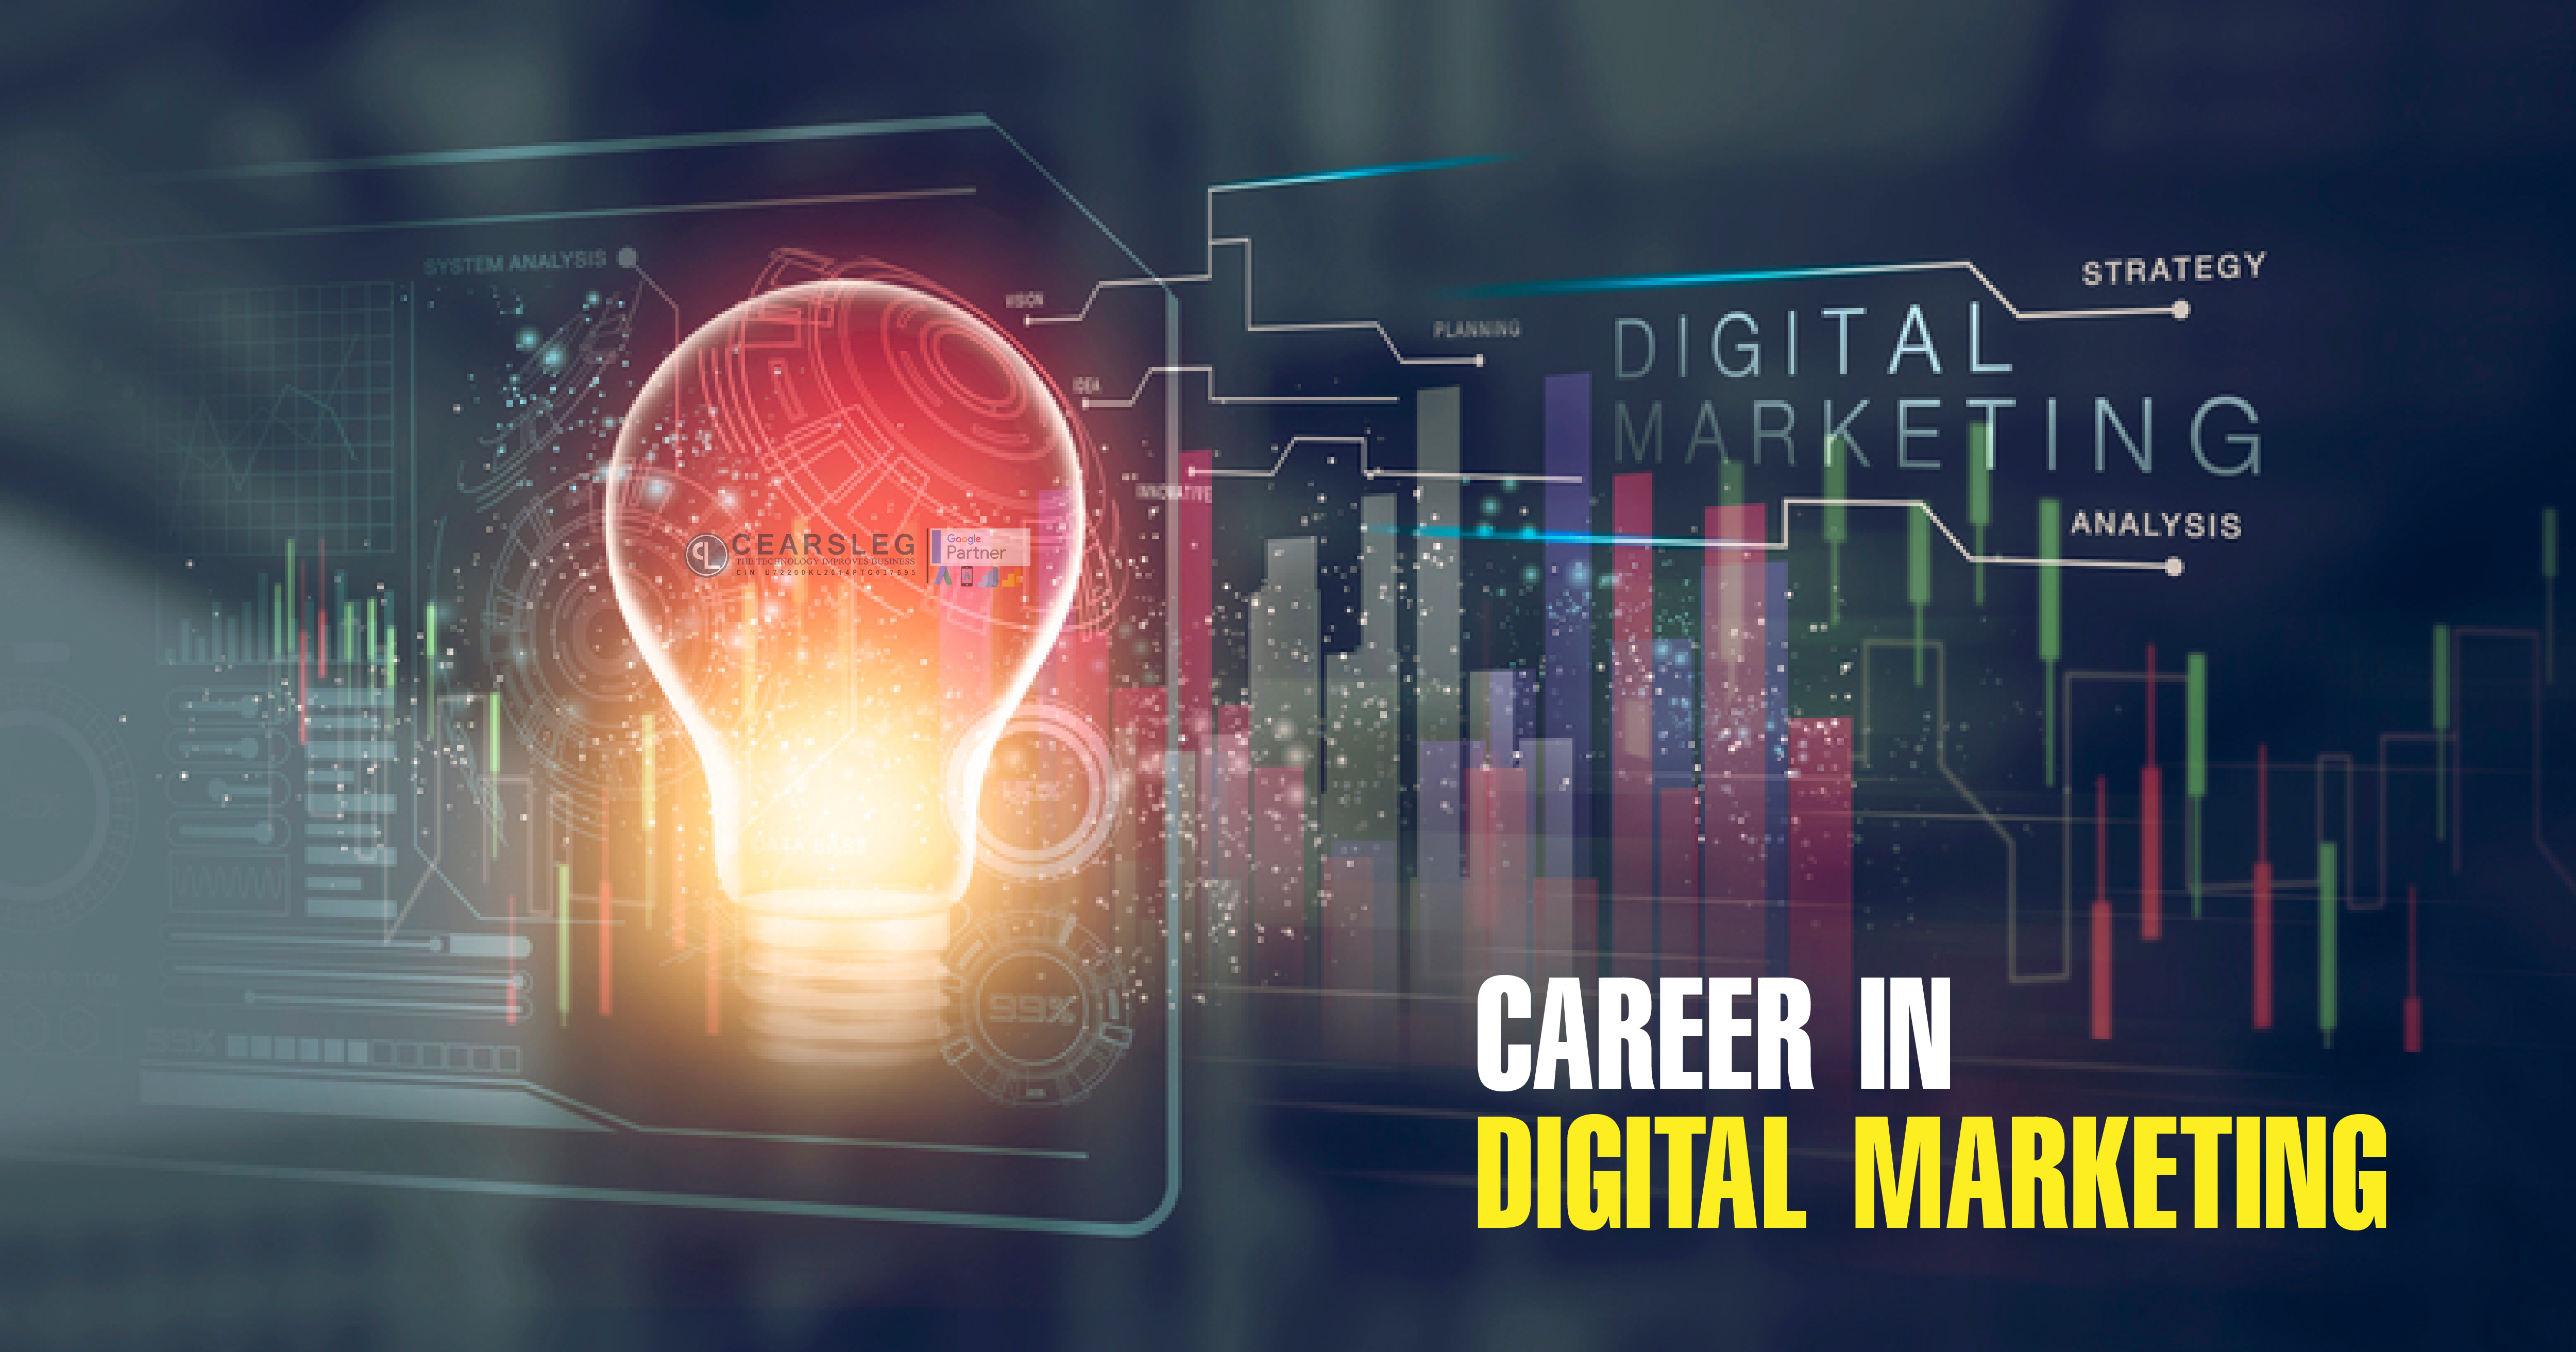 How to Build a Career in Digital Marketing